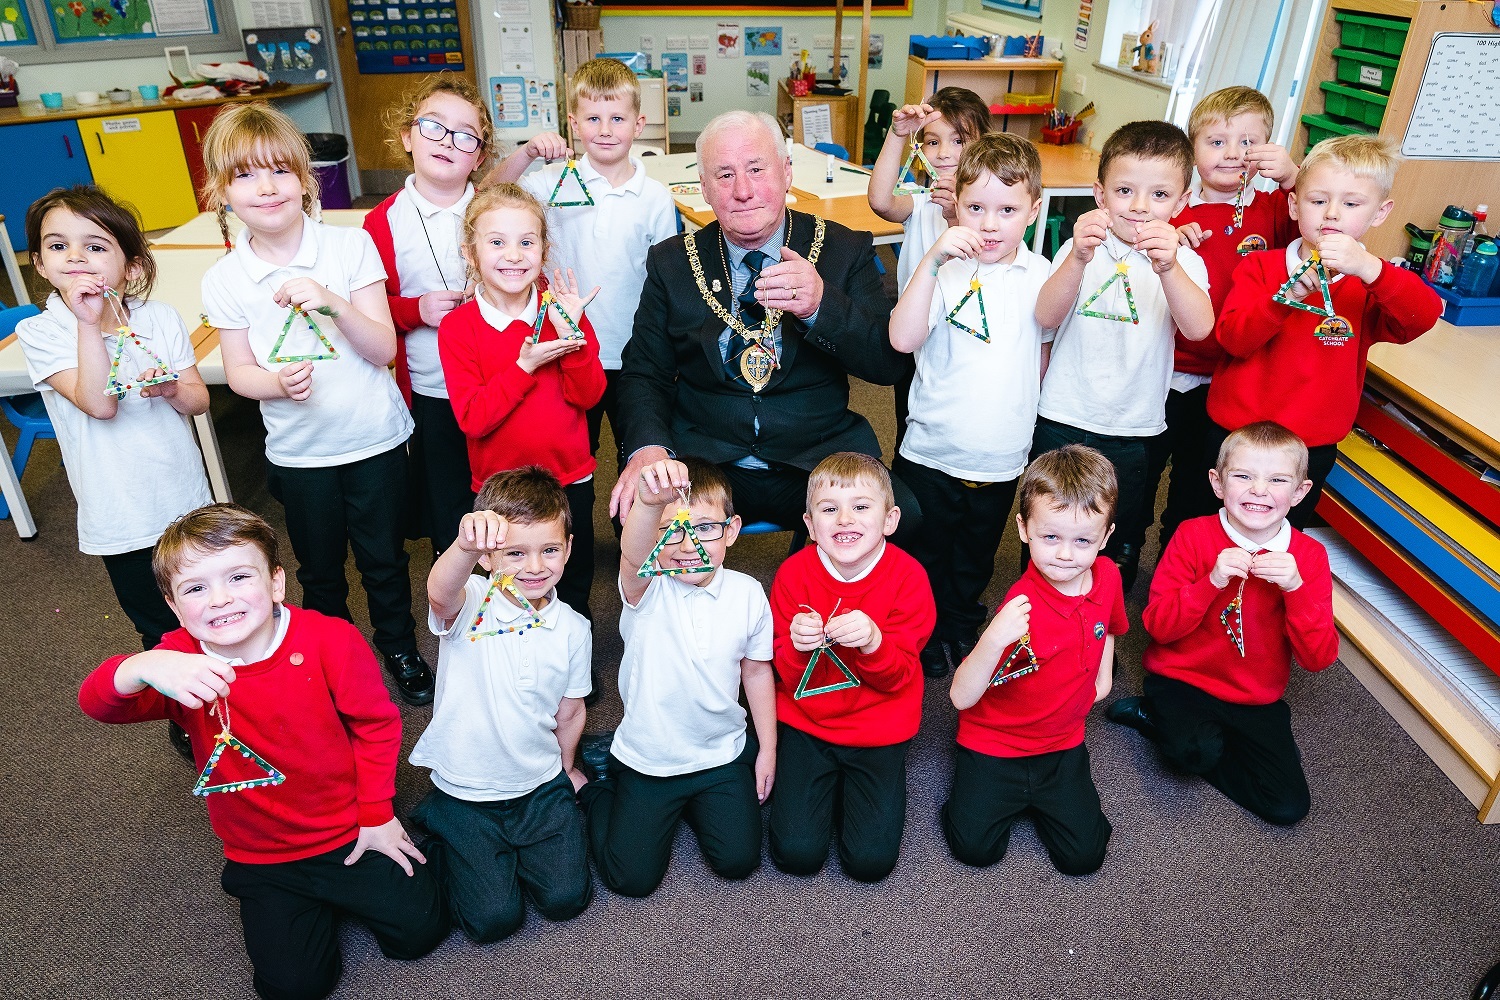 Cllr Watts Steling visits Catchgate Primary School to take part in Our Christmas Tree Decoration project Picture: Silverbird Photography Emily Carey